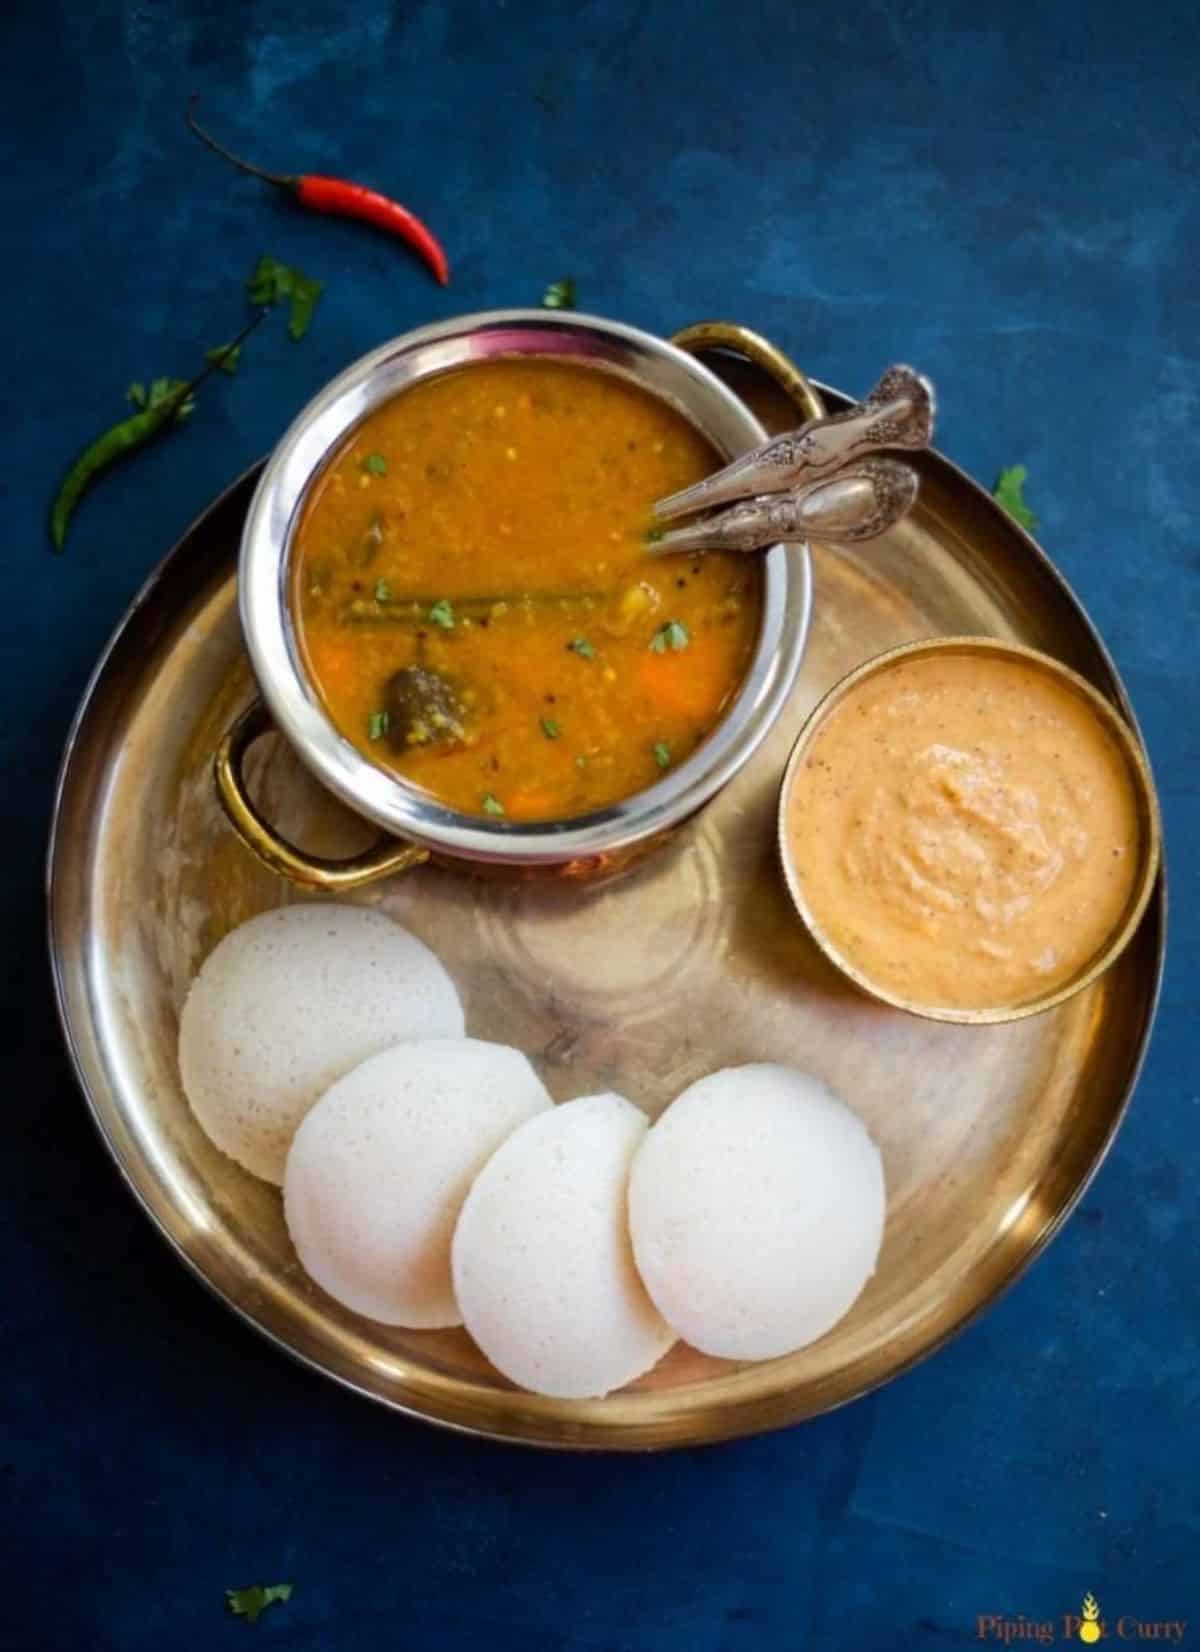 Crispy Steamed Idli - Savory Rice Cakes with a bowl of soup and a bowl of dip on a metal tray.